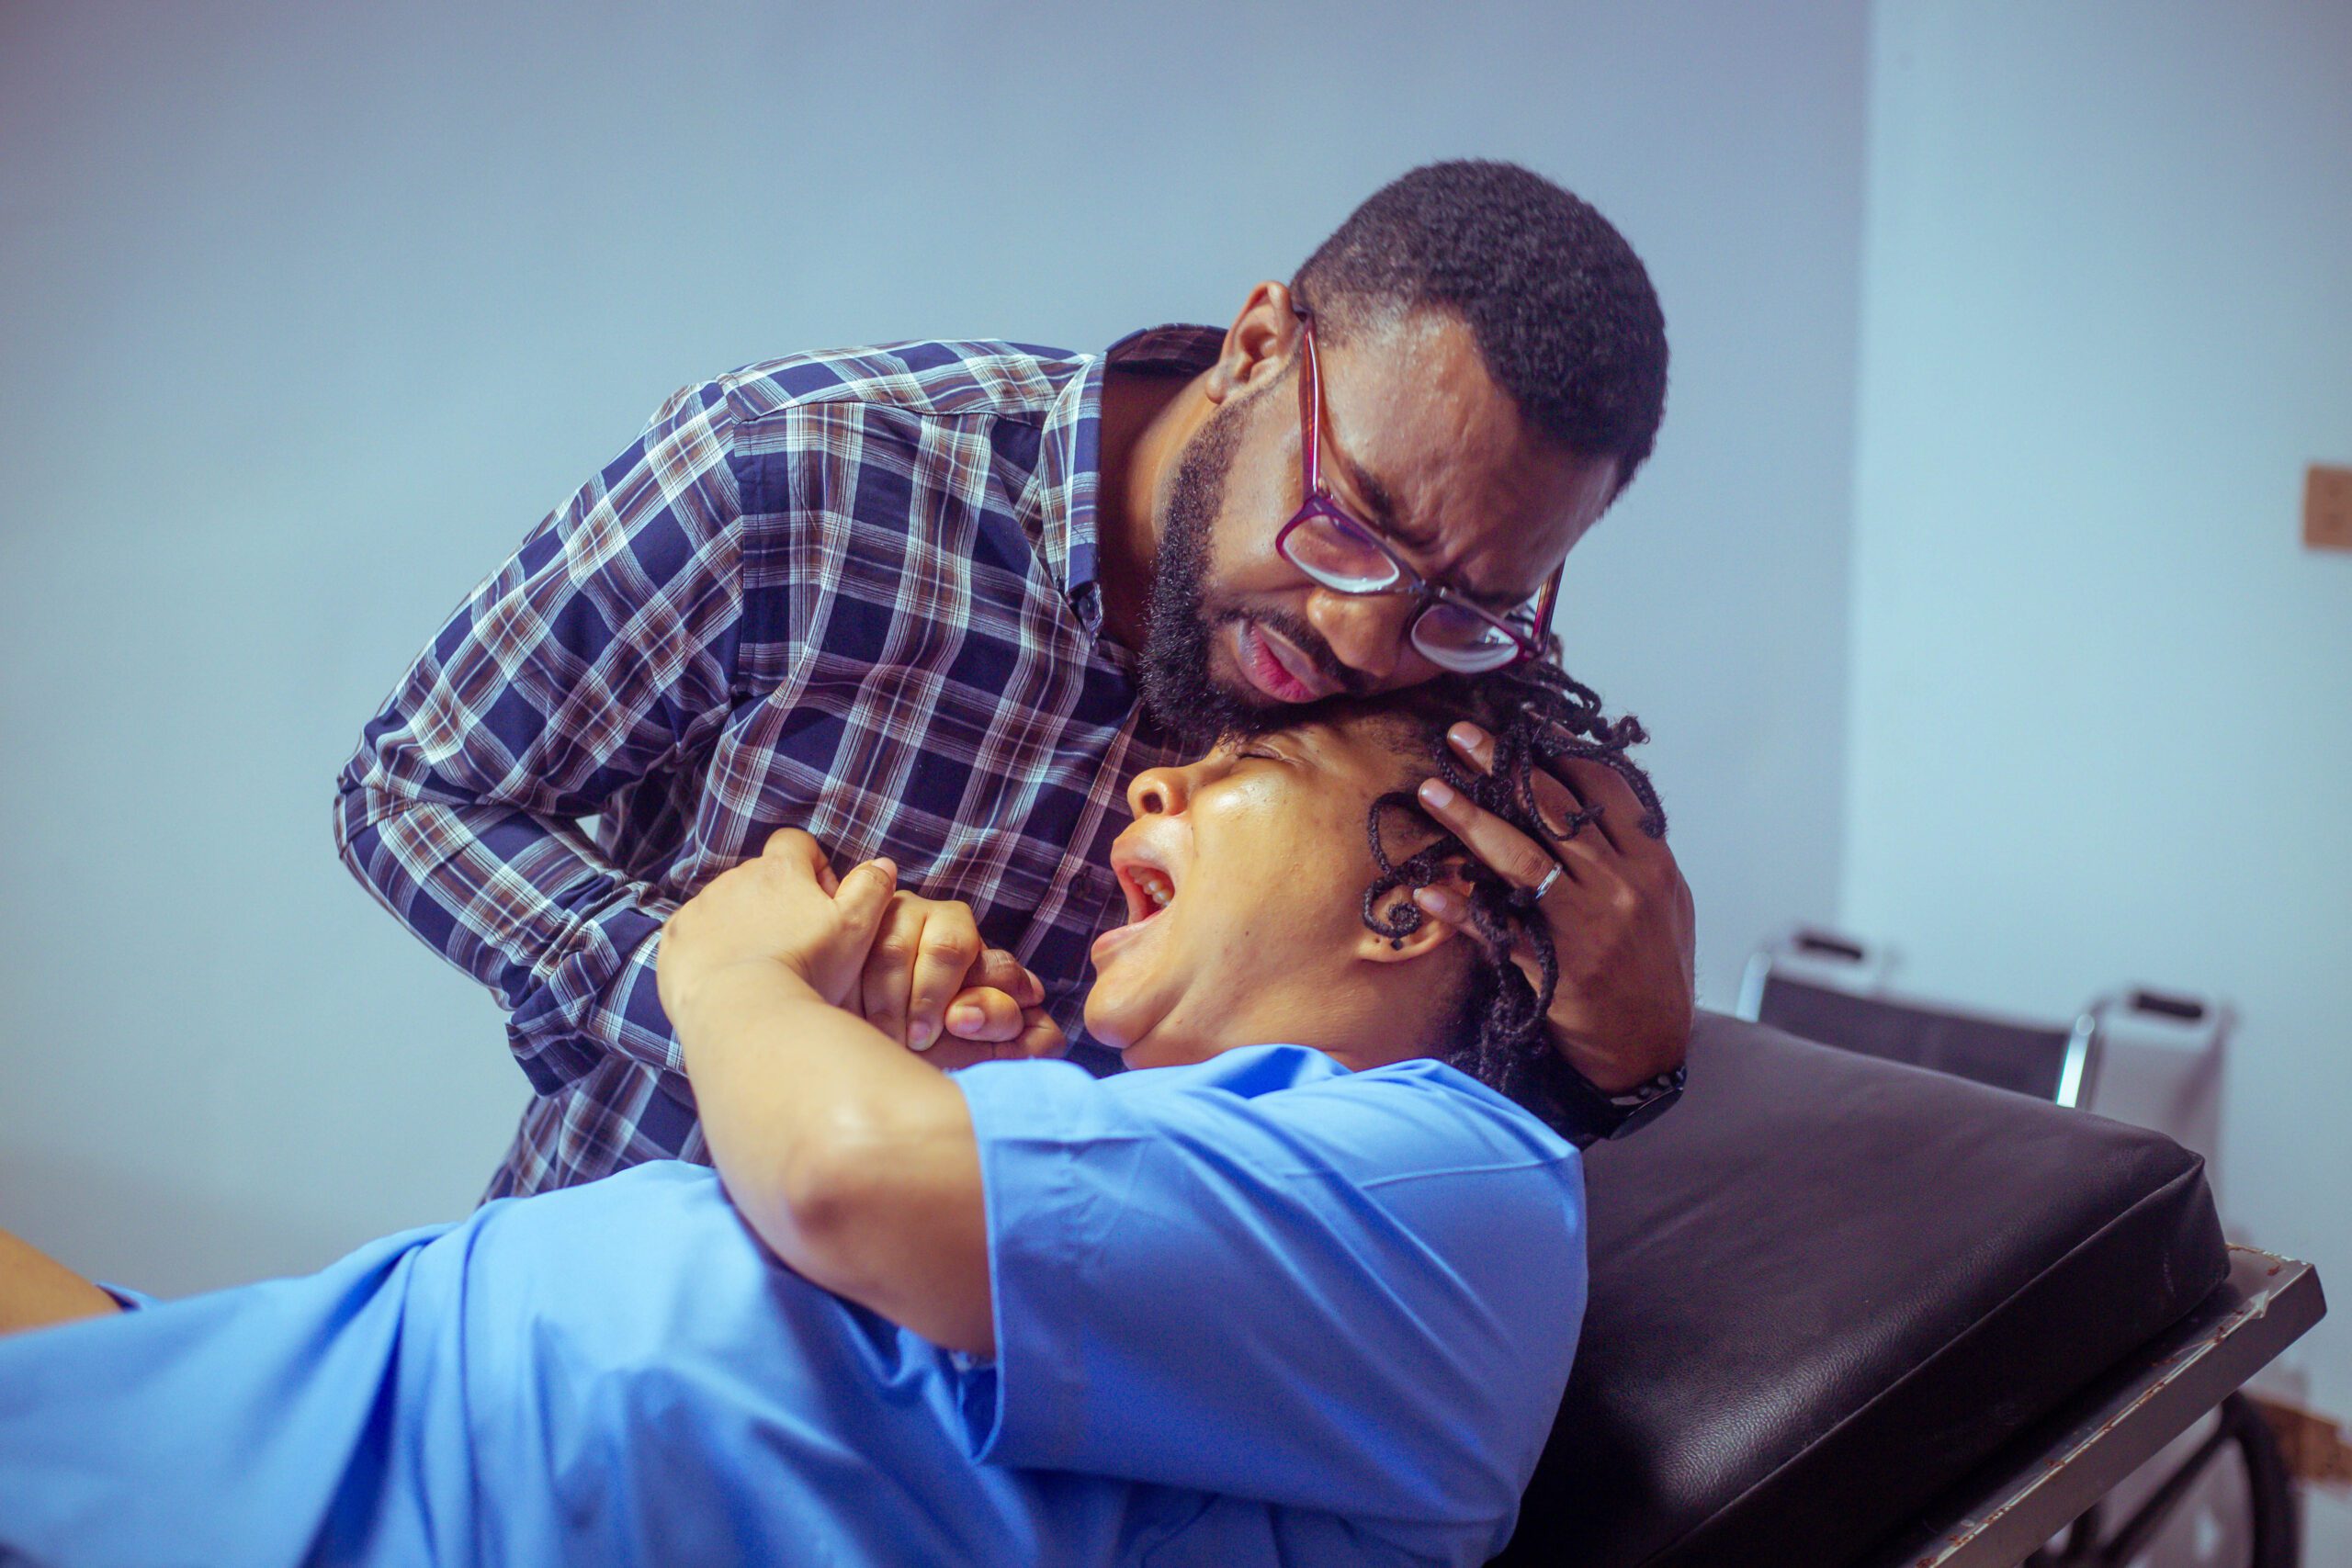 To Love and Protect by Muyiwa Aluko 6 scaled - Muyiwa Aluko’s “To Love and Protect” Unveils Key Cast, Begins Principal Photography (EXCLUSIVE)